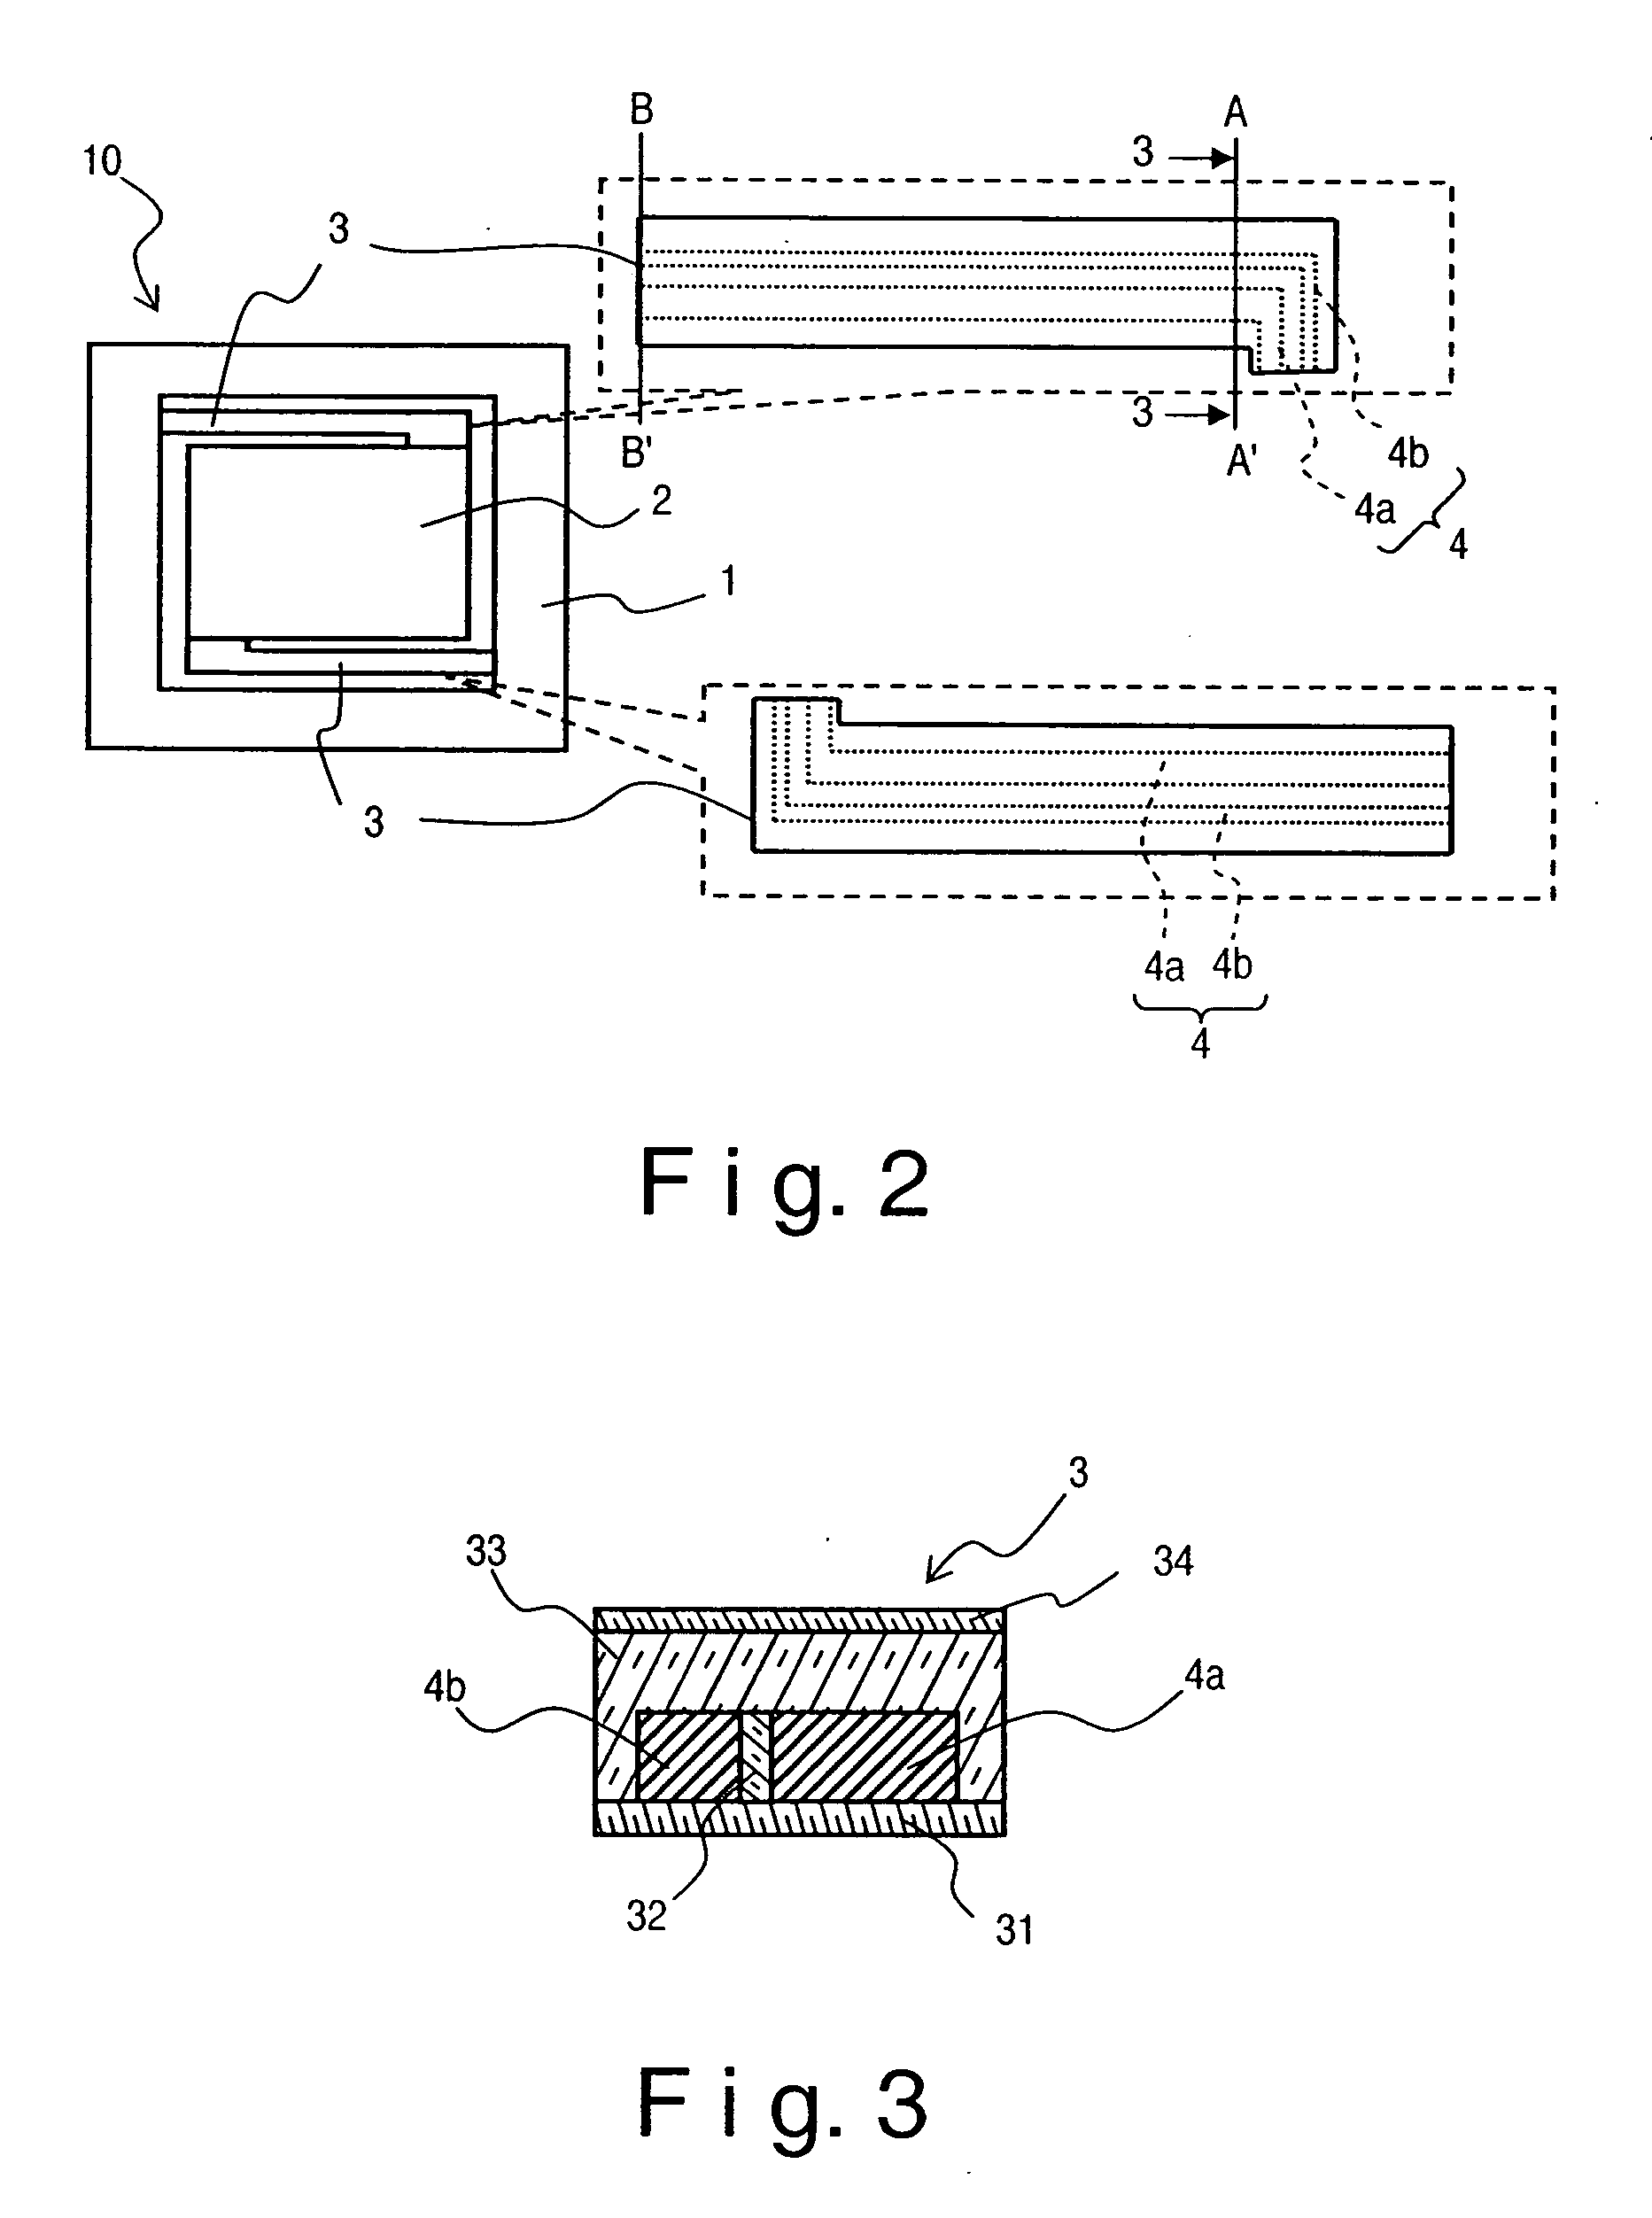 Infrared radiation detecting device